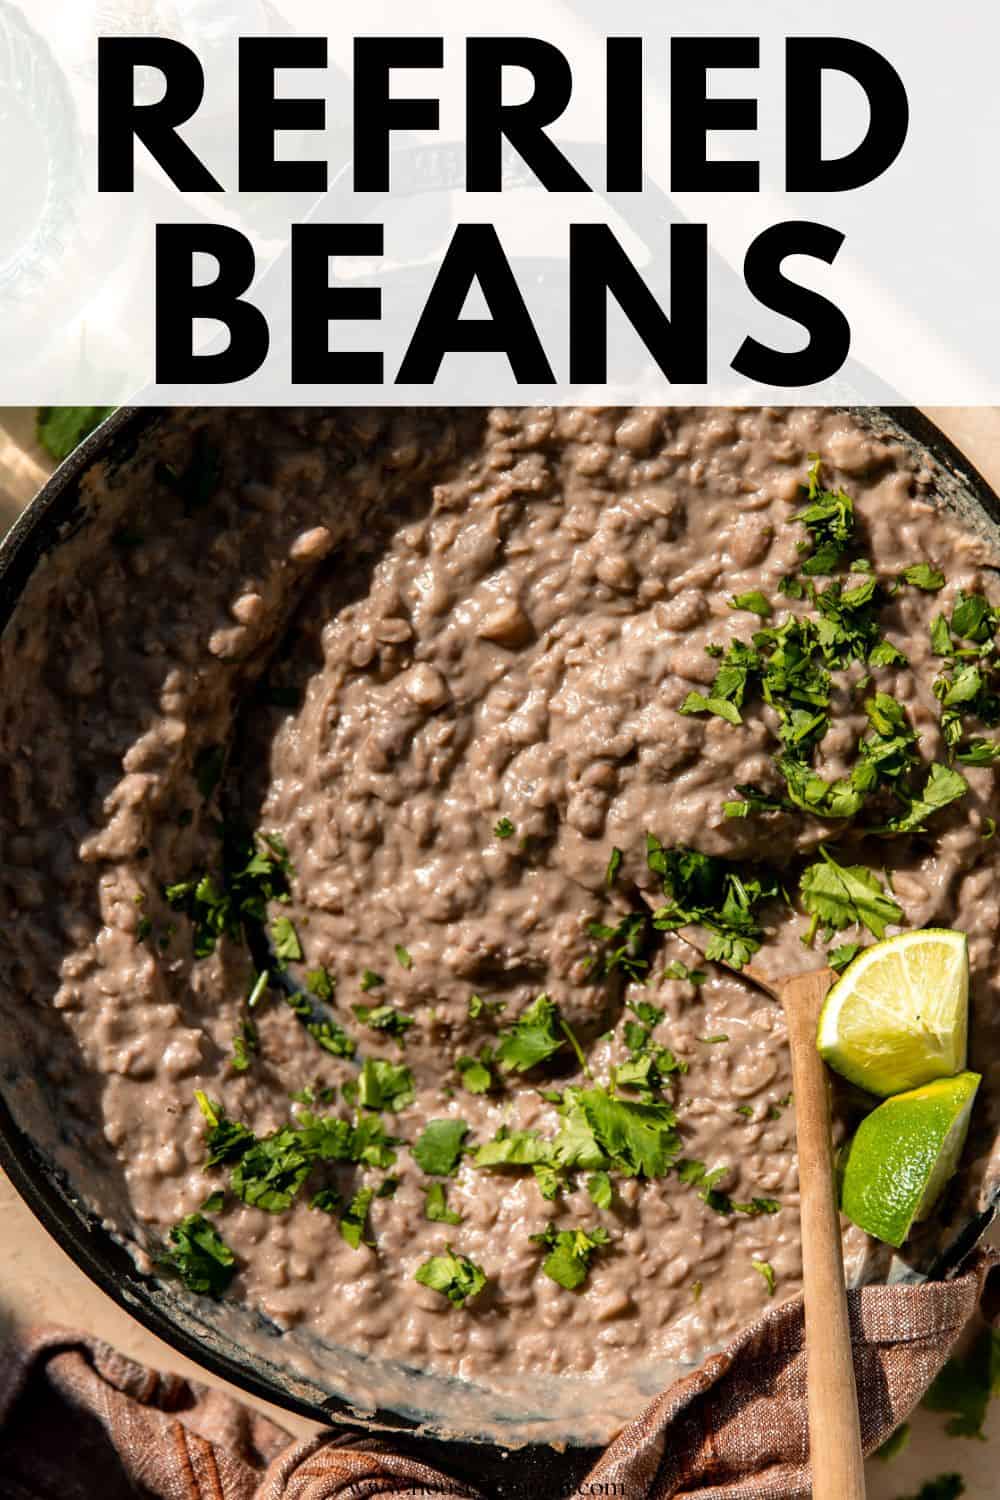 Refried Beans with text.